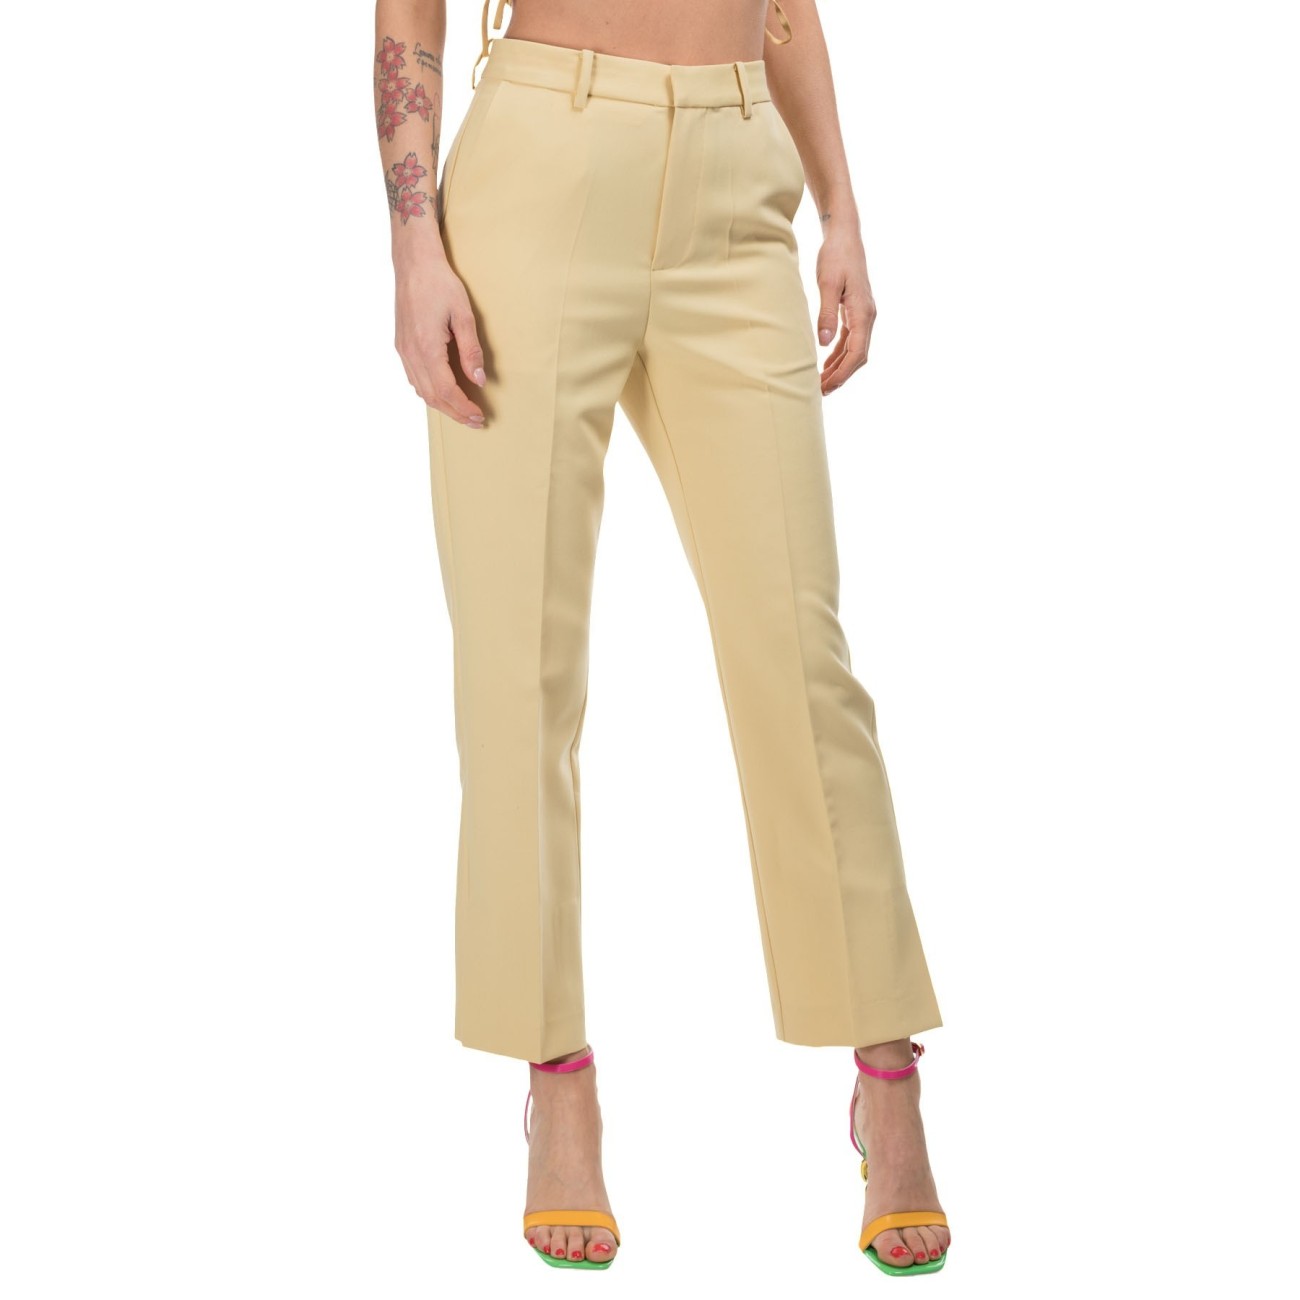 Isabelle Blanche yellow pants